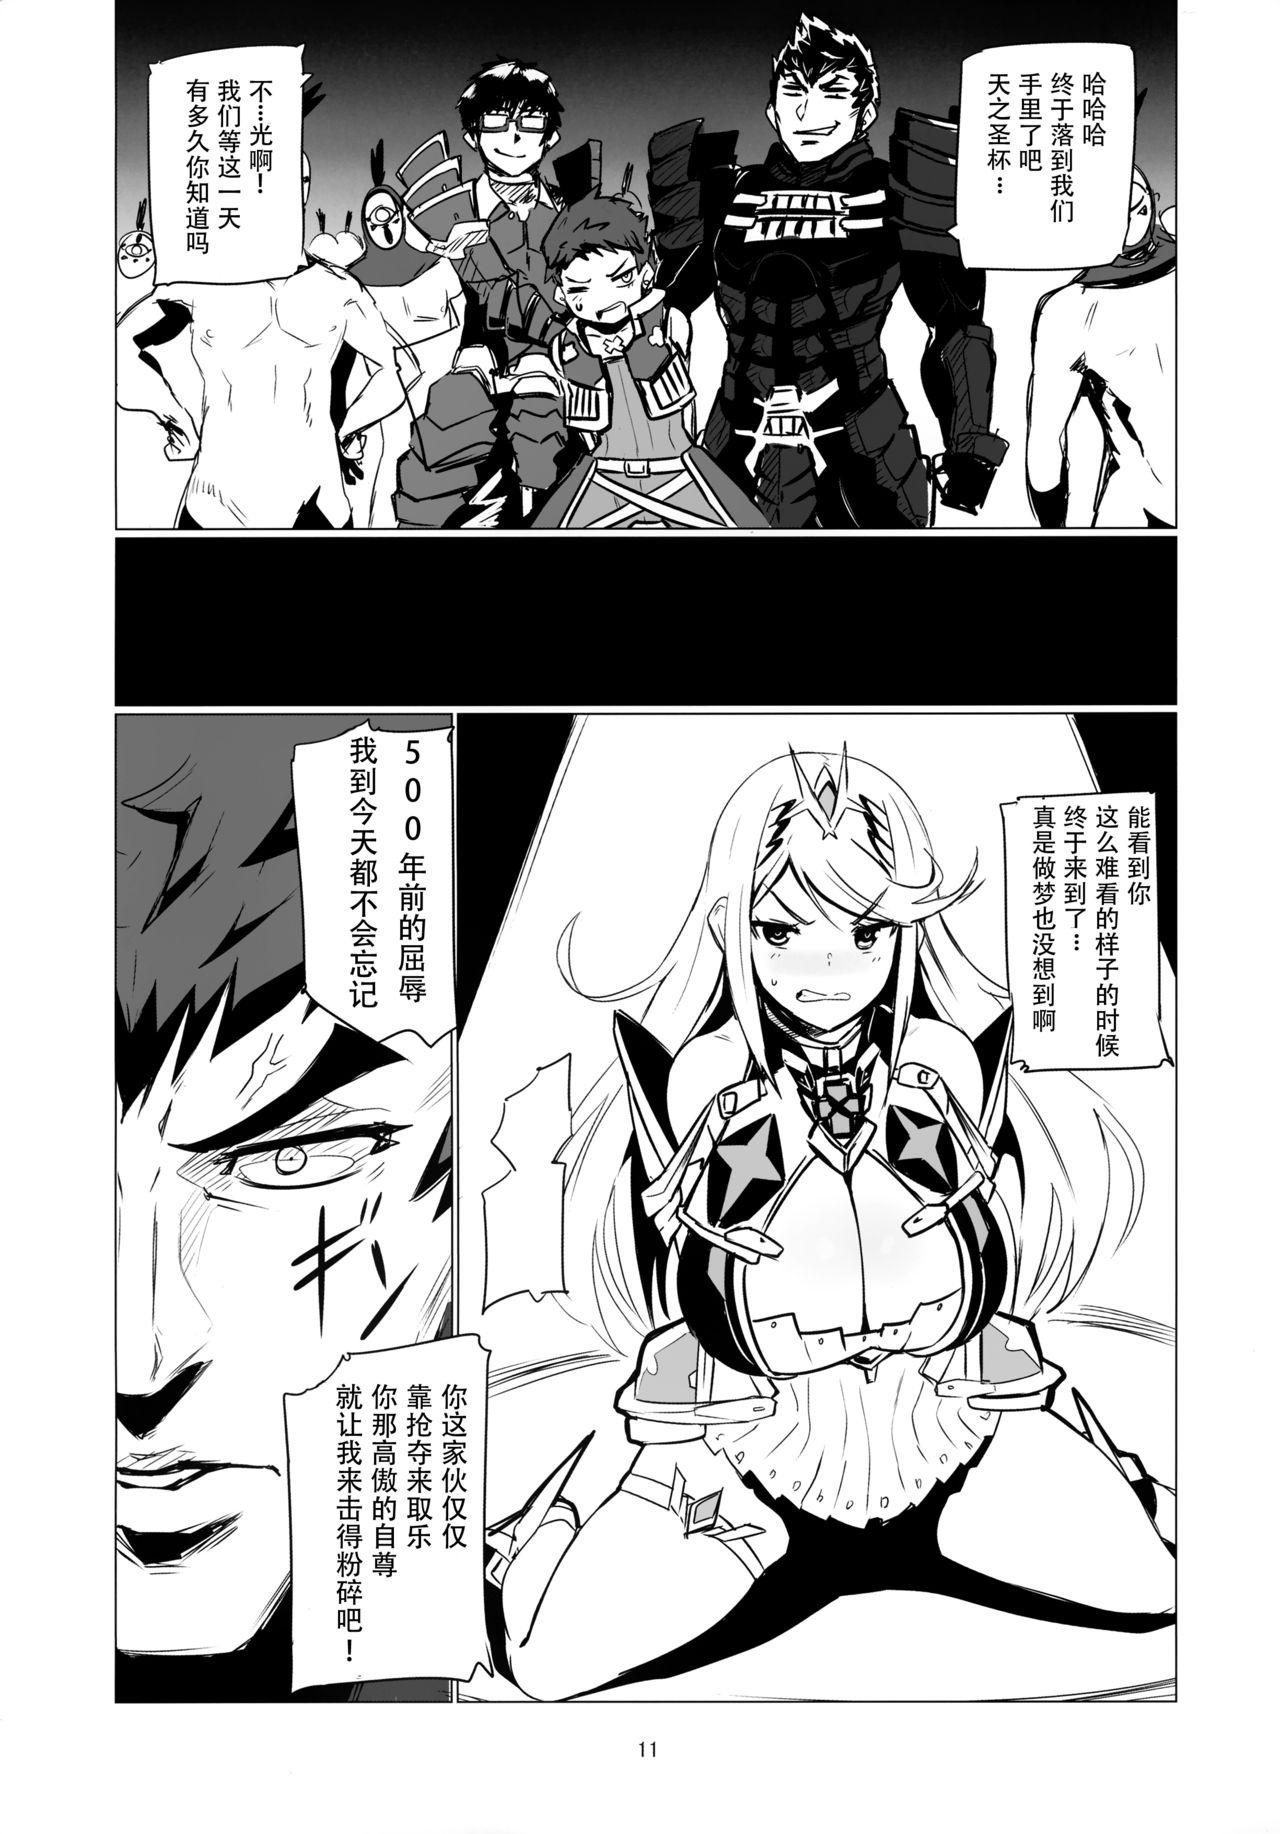 Blowjob Homurizebure - Xenoblade chronicles 2 Dress - Page 11